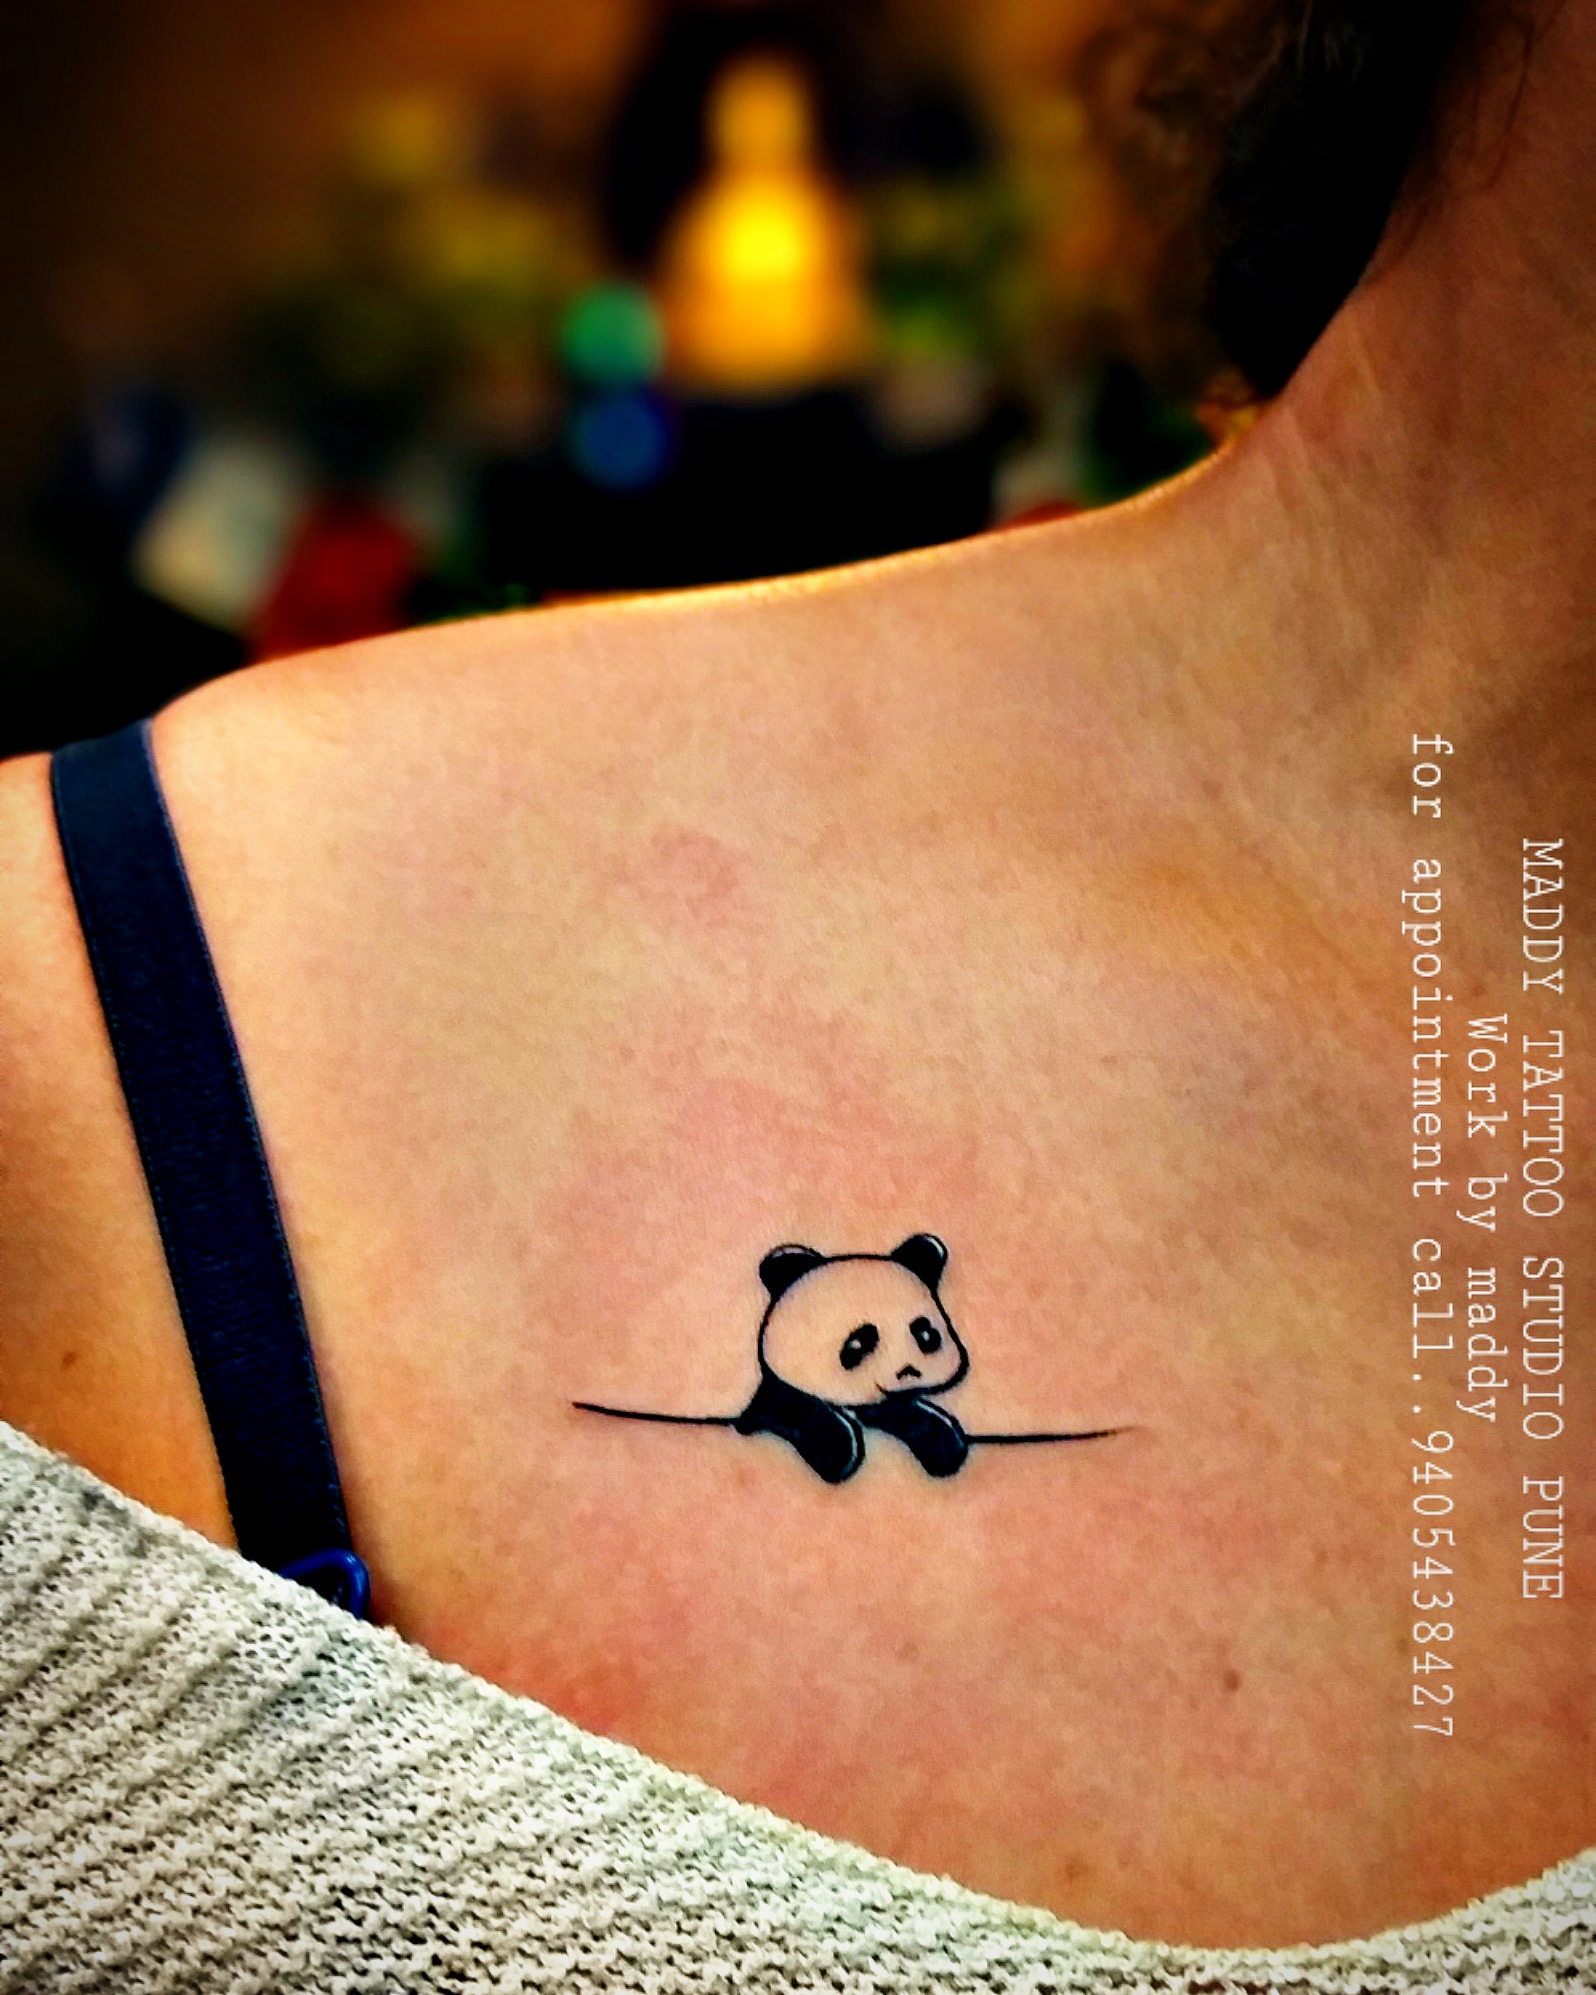 It'... - It's Live Through This Tattoos, Supplies, & Piercings | Facebook